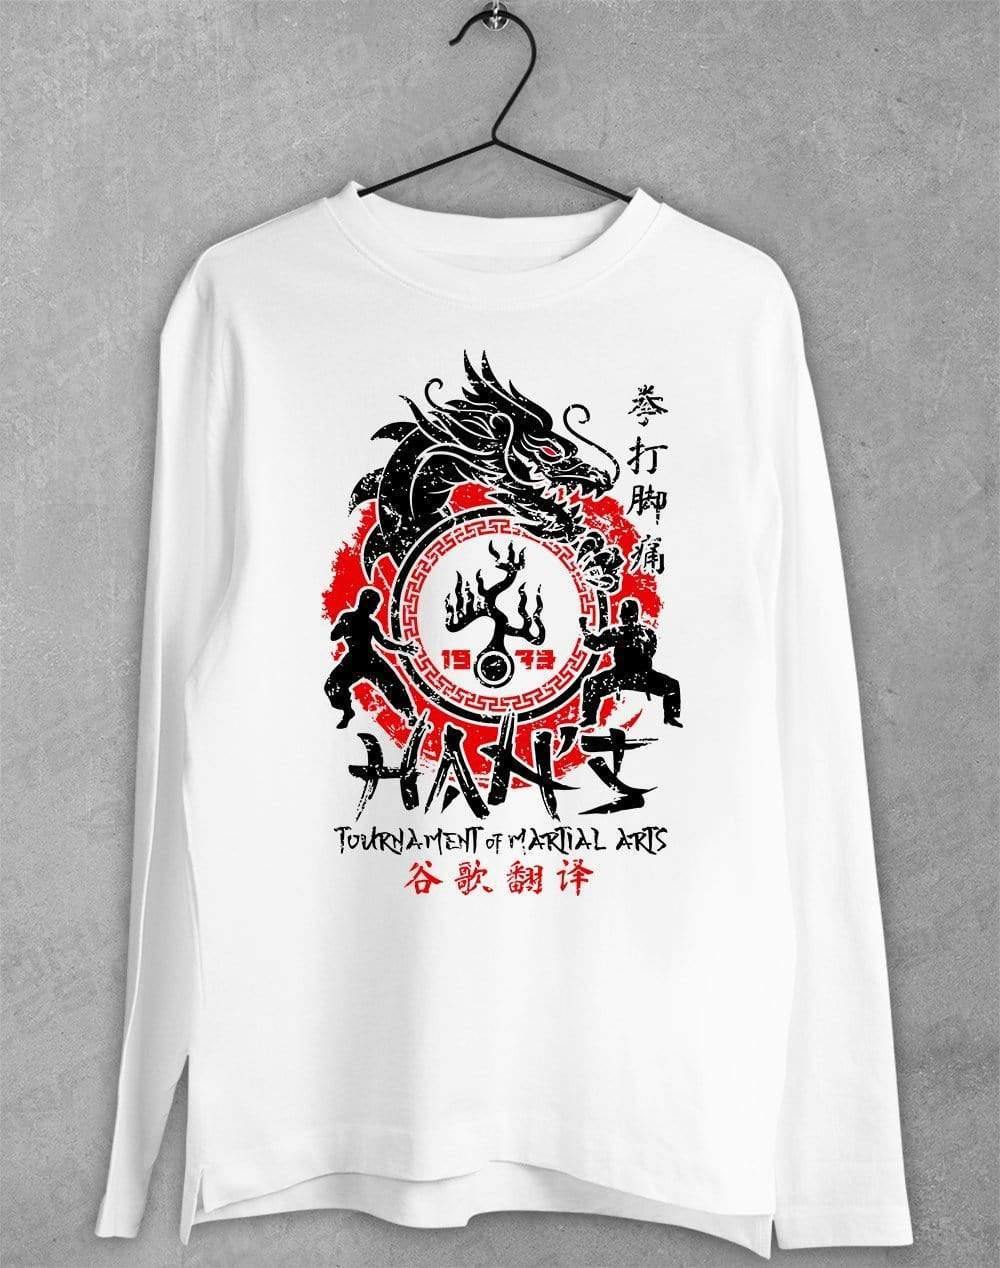 Han's Tournament of Martial Arts Long Sleeve T-Shirt S / White  - Off World Tees